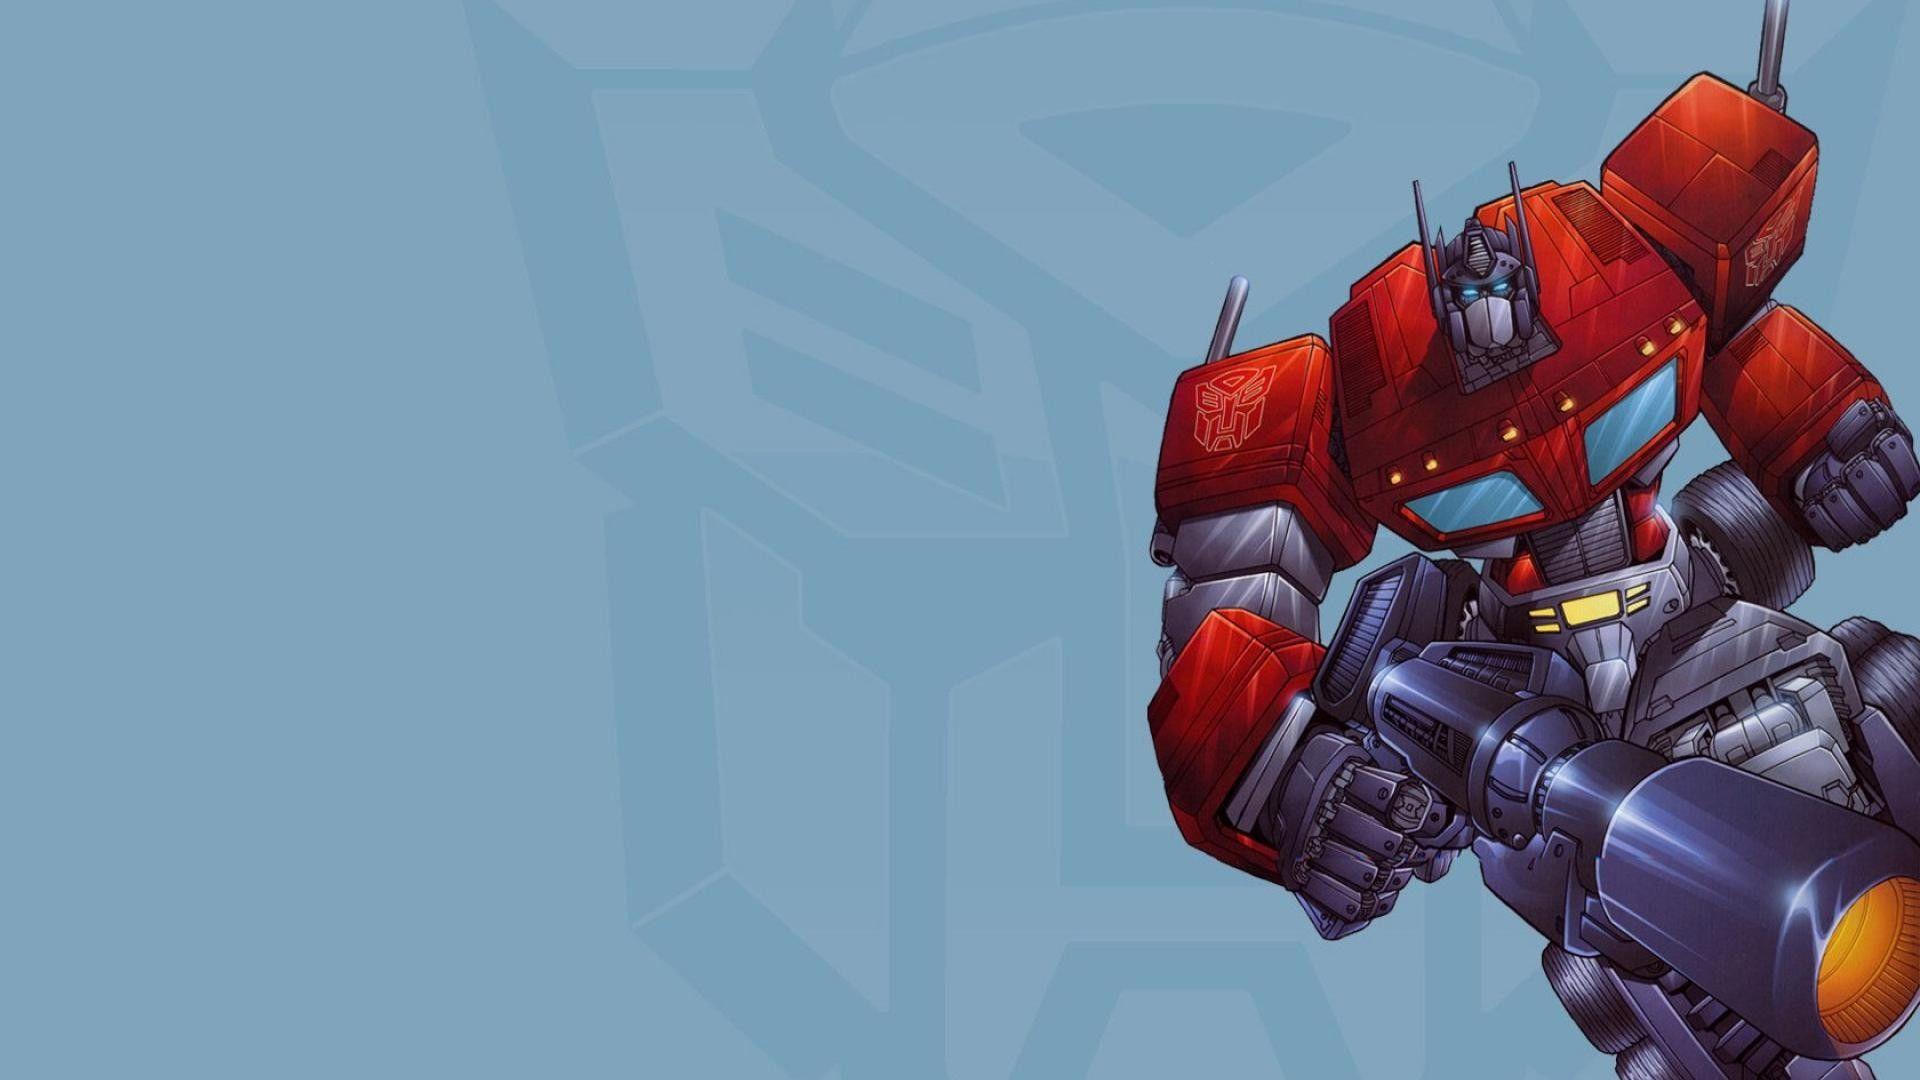 G1 Transformers Wallpapers HD.